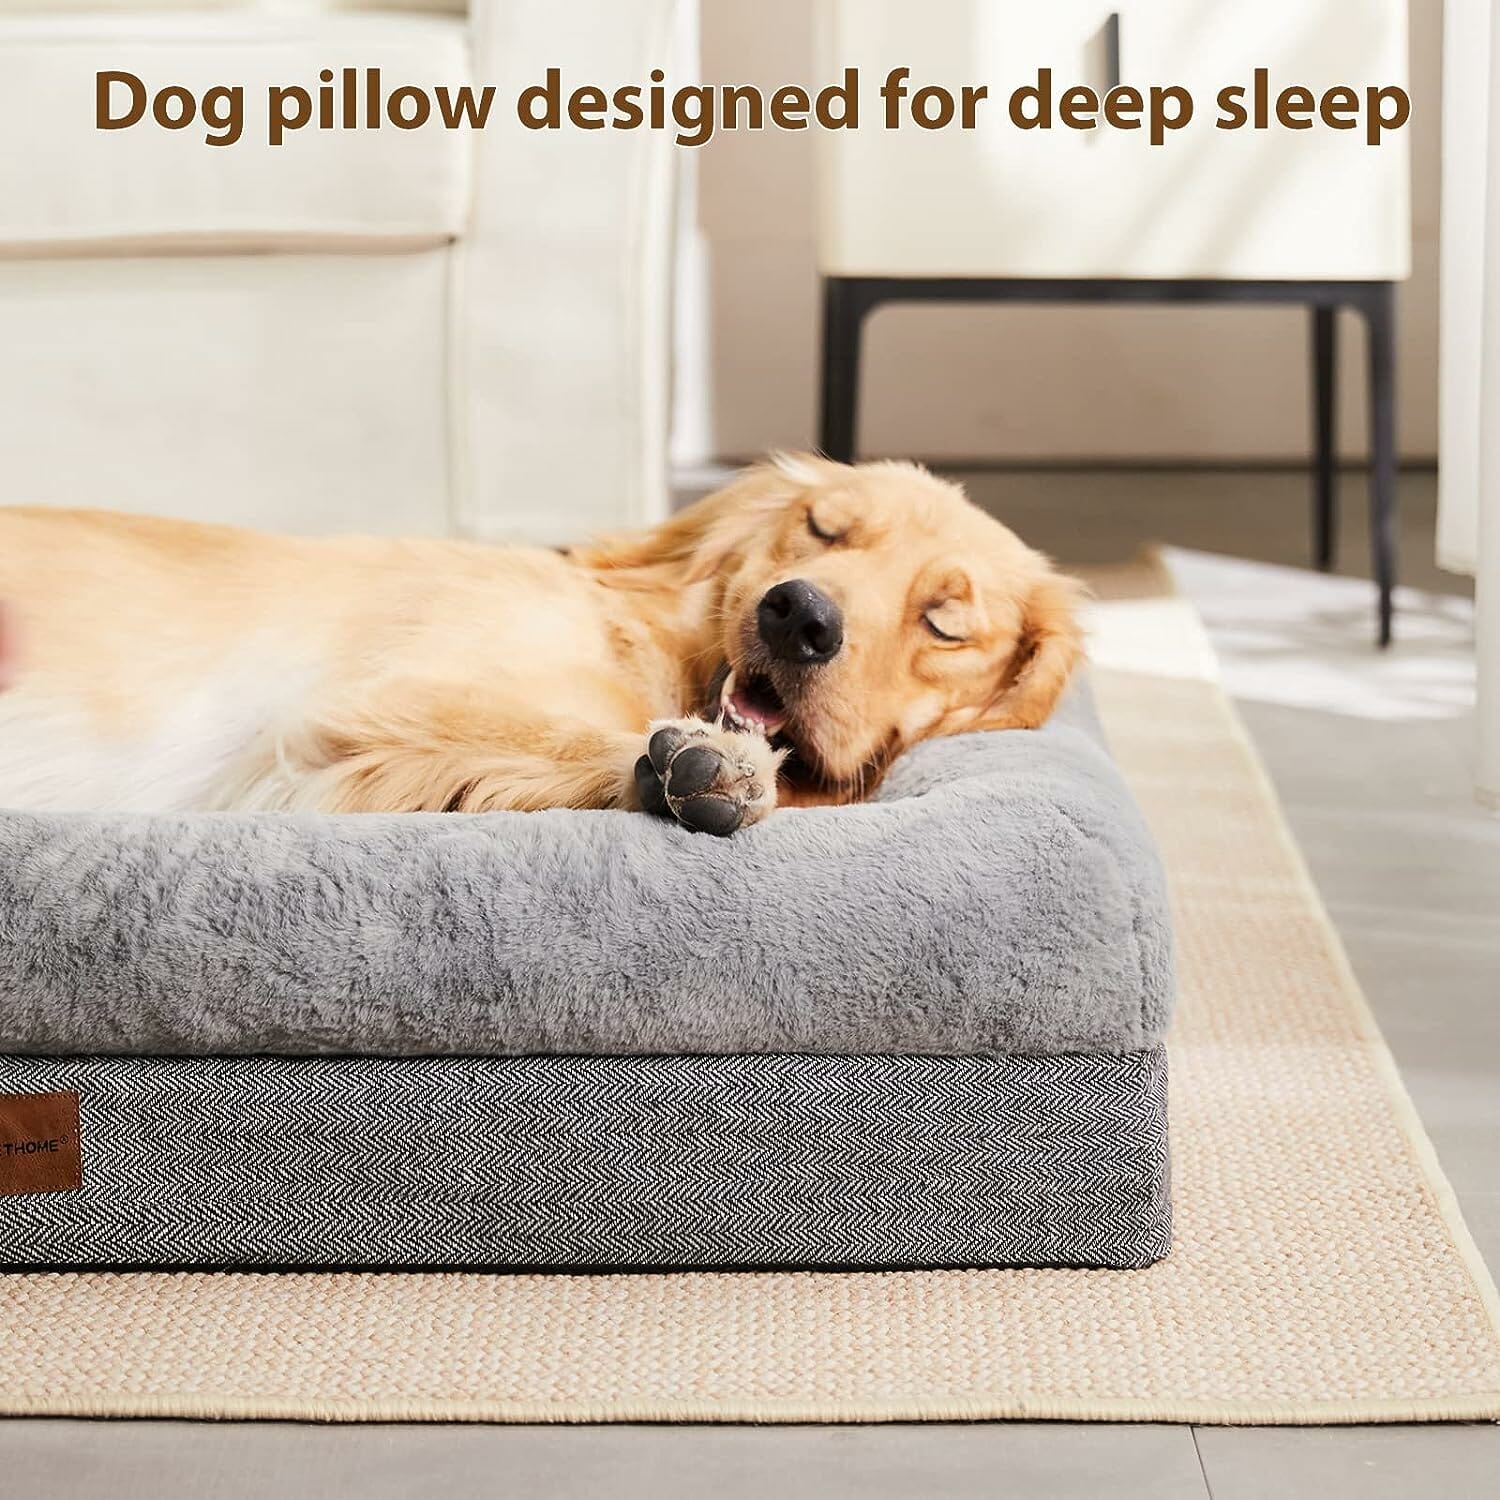 Bfpethome Sofa Dog Bed Review